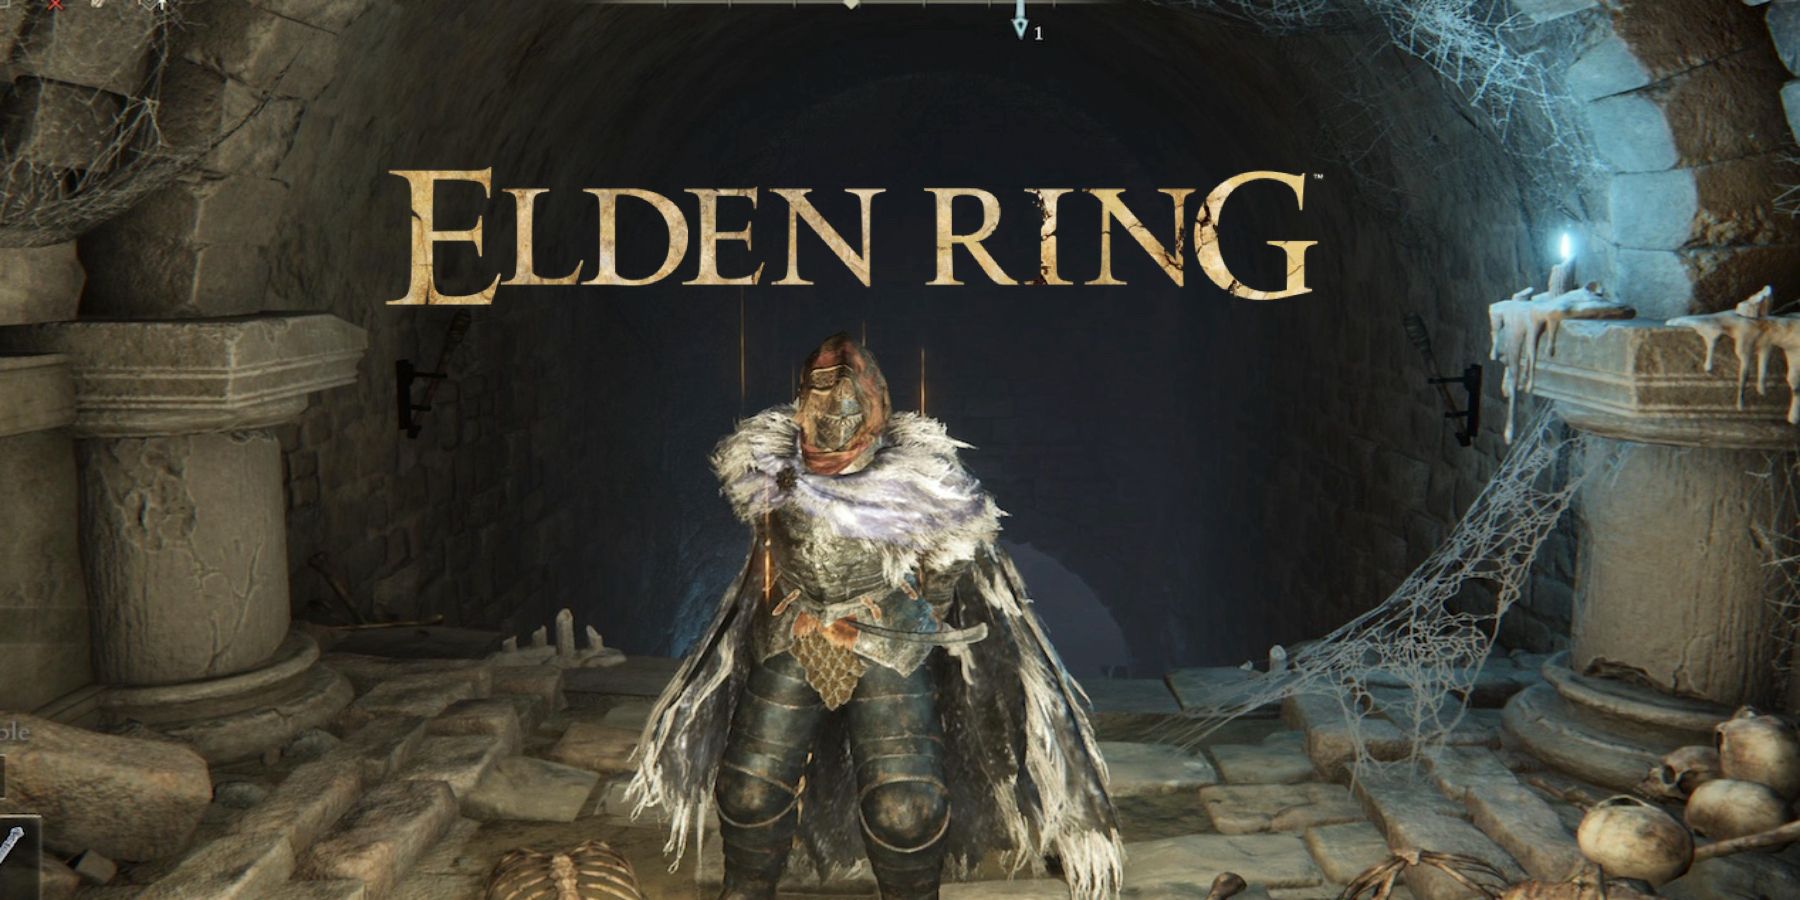 elden ring character tarnished near site of lost grace